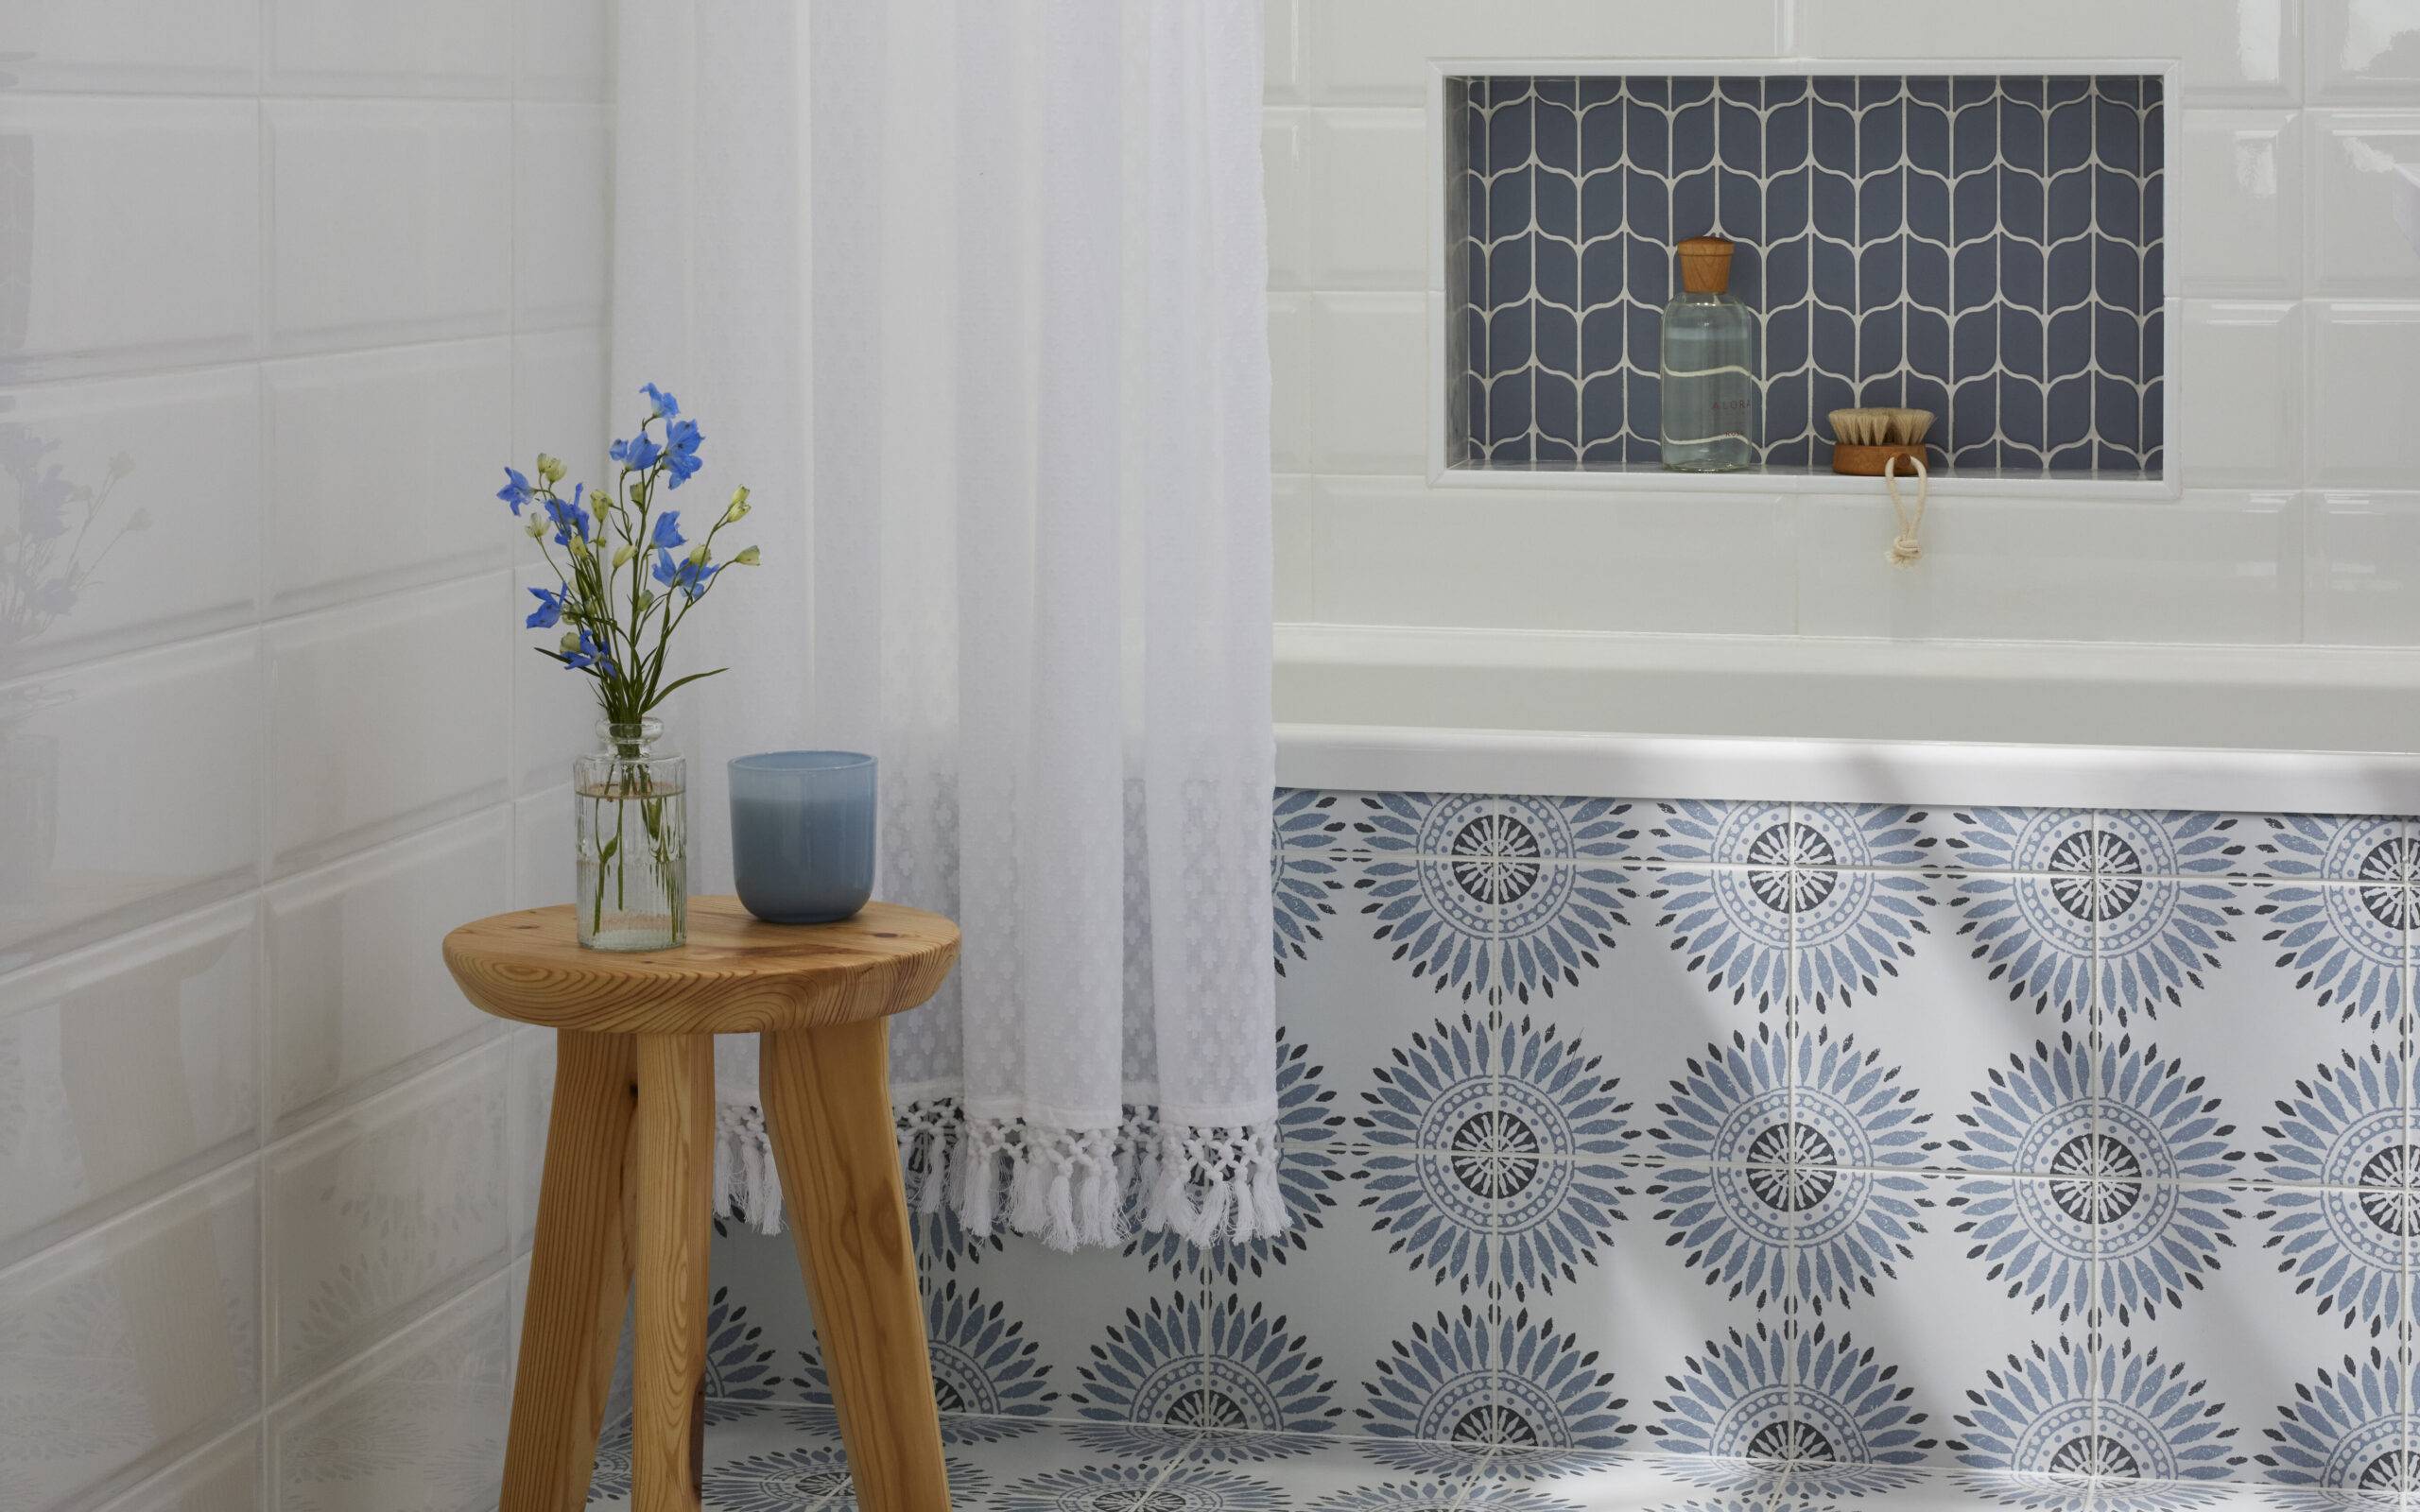 Bathroom featuring blue and white patterned tile on the floor and up the exterior side of the tub wall.